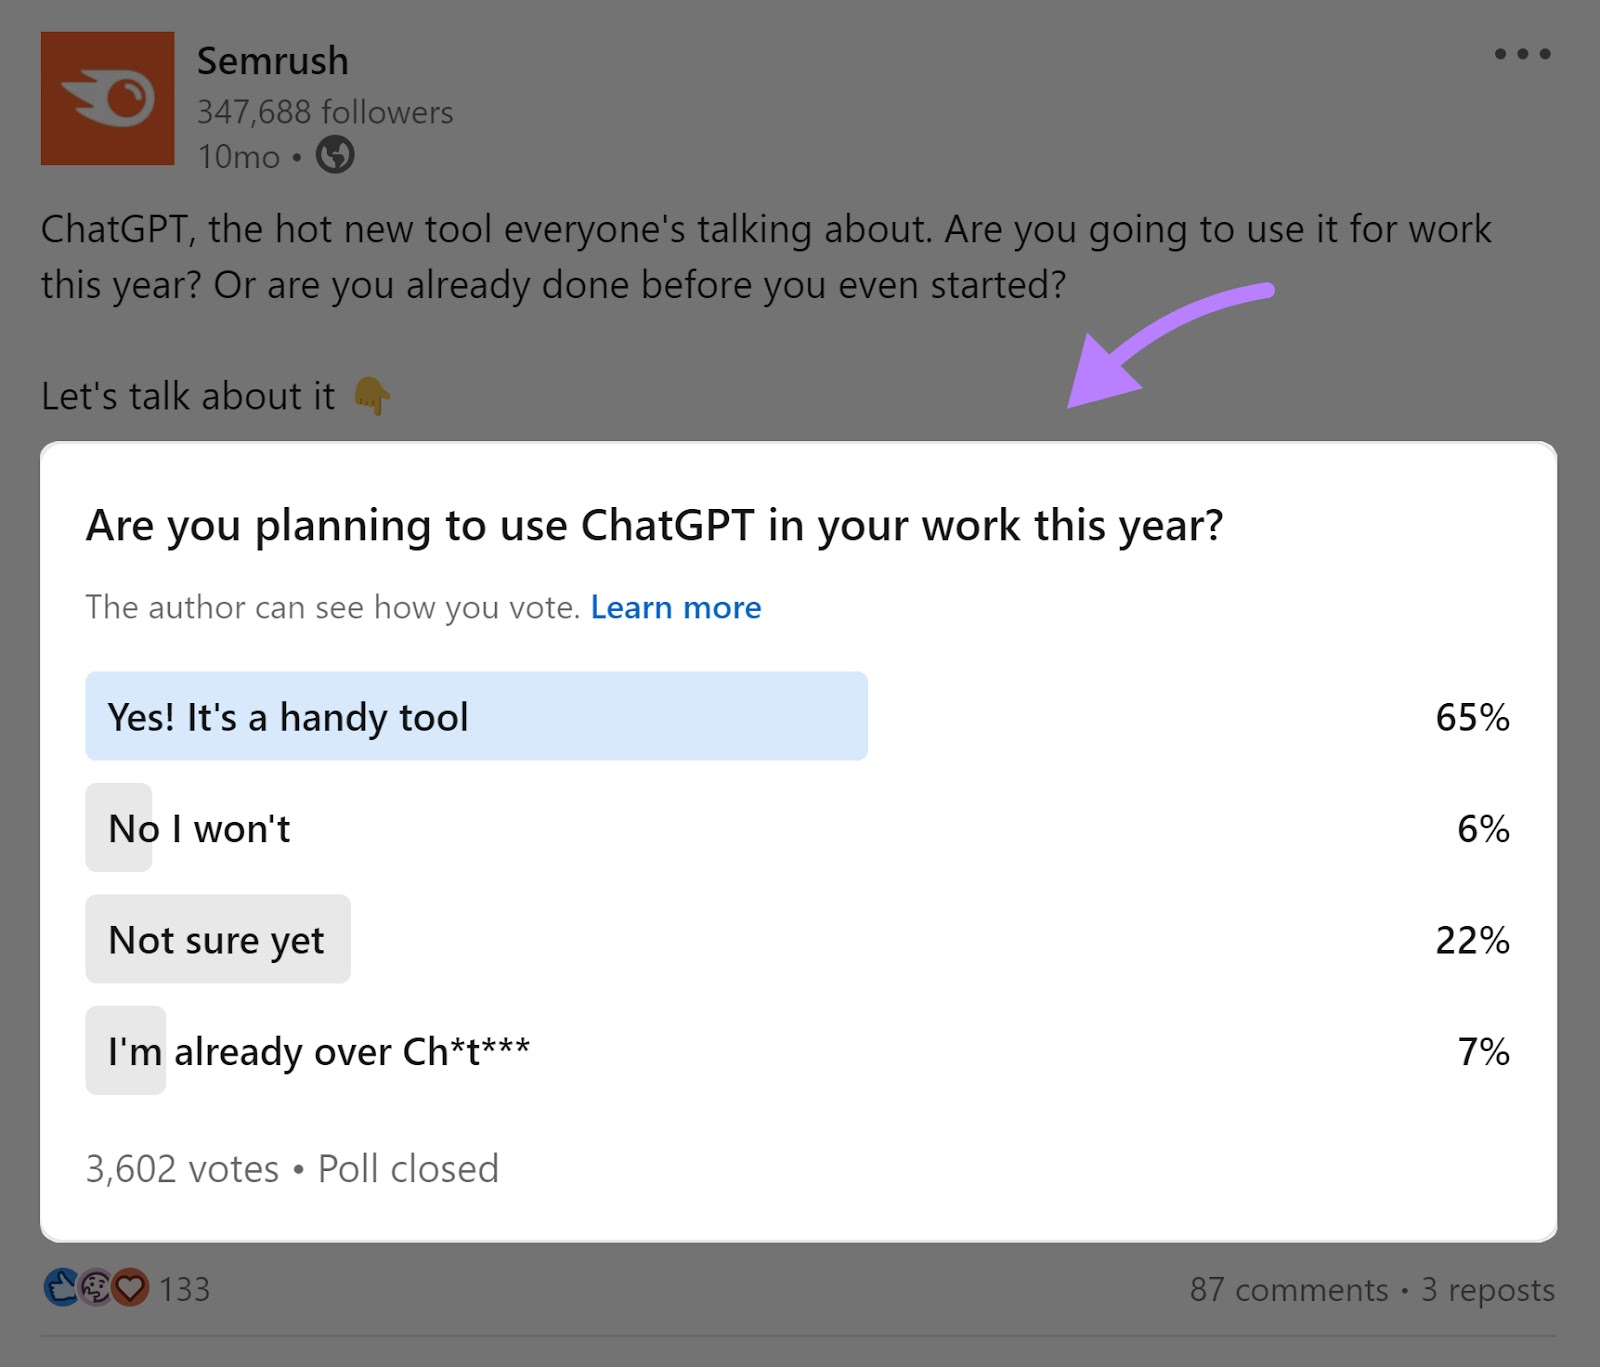 "Are you planning to use ChatGPT in your work this year?" poll by Semrush on LinkedIn